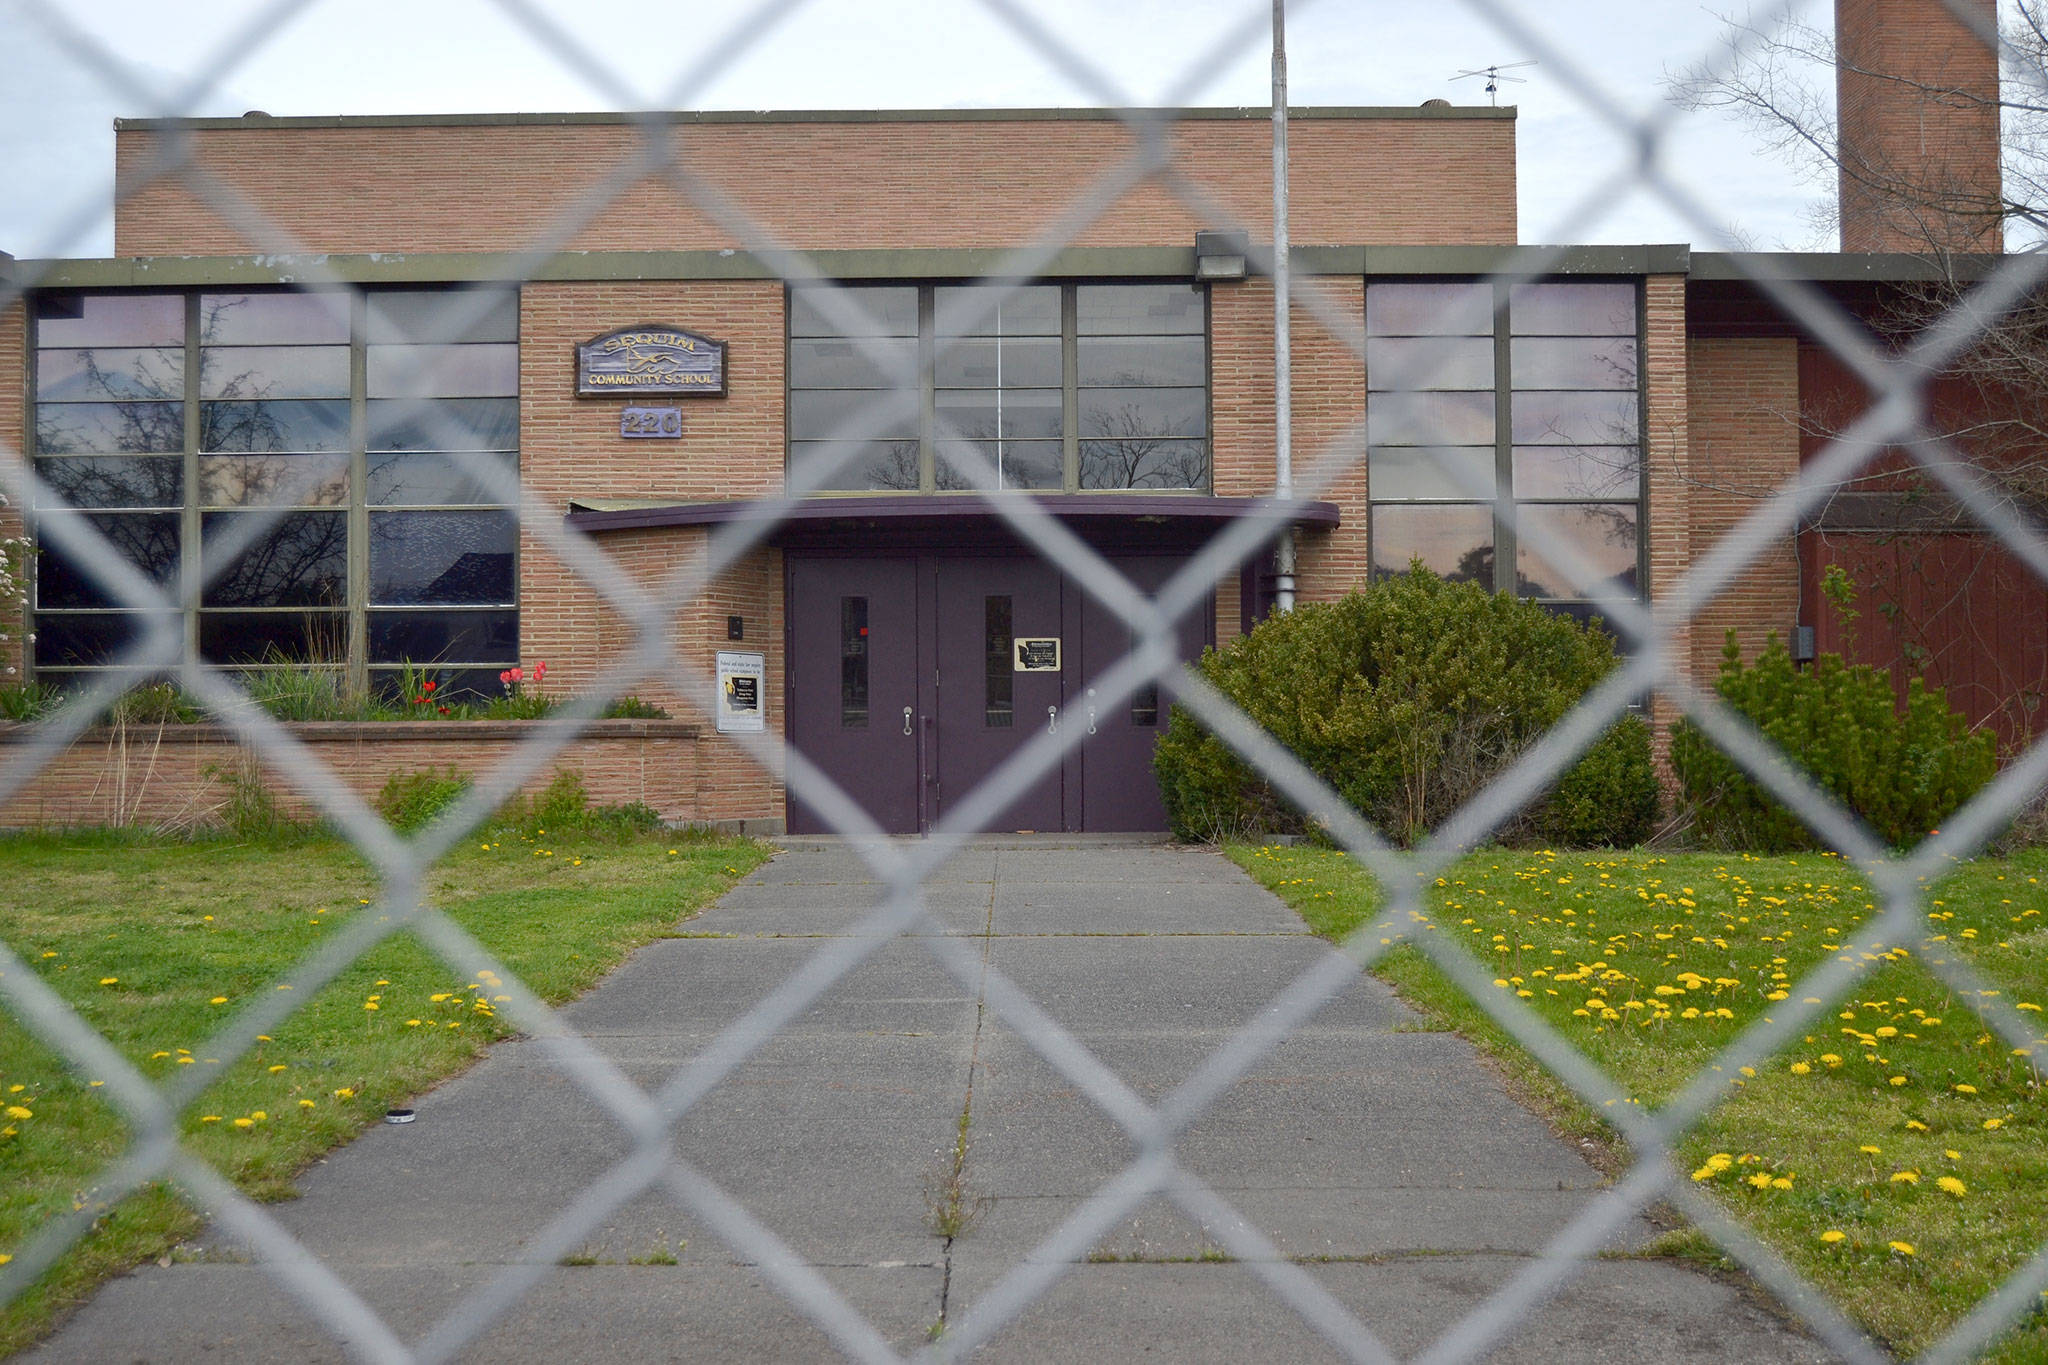 Chain link fencing went up around the Sequim Community School last week as Sequim School District’s capital project plans move forward. Sequim Gazette photo by Matthew Nash